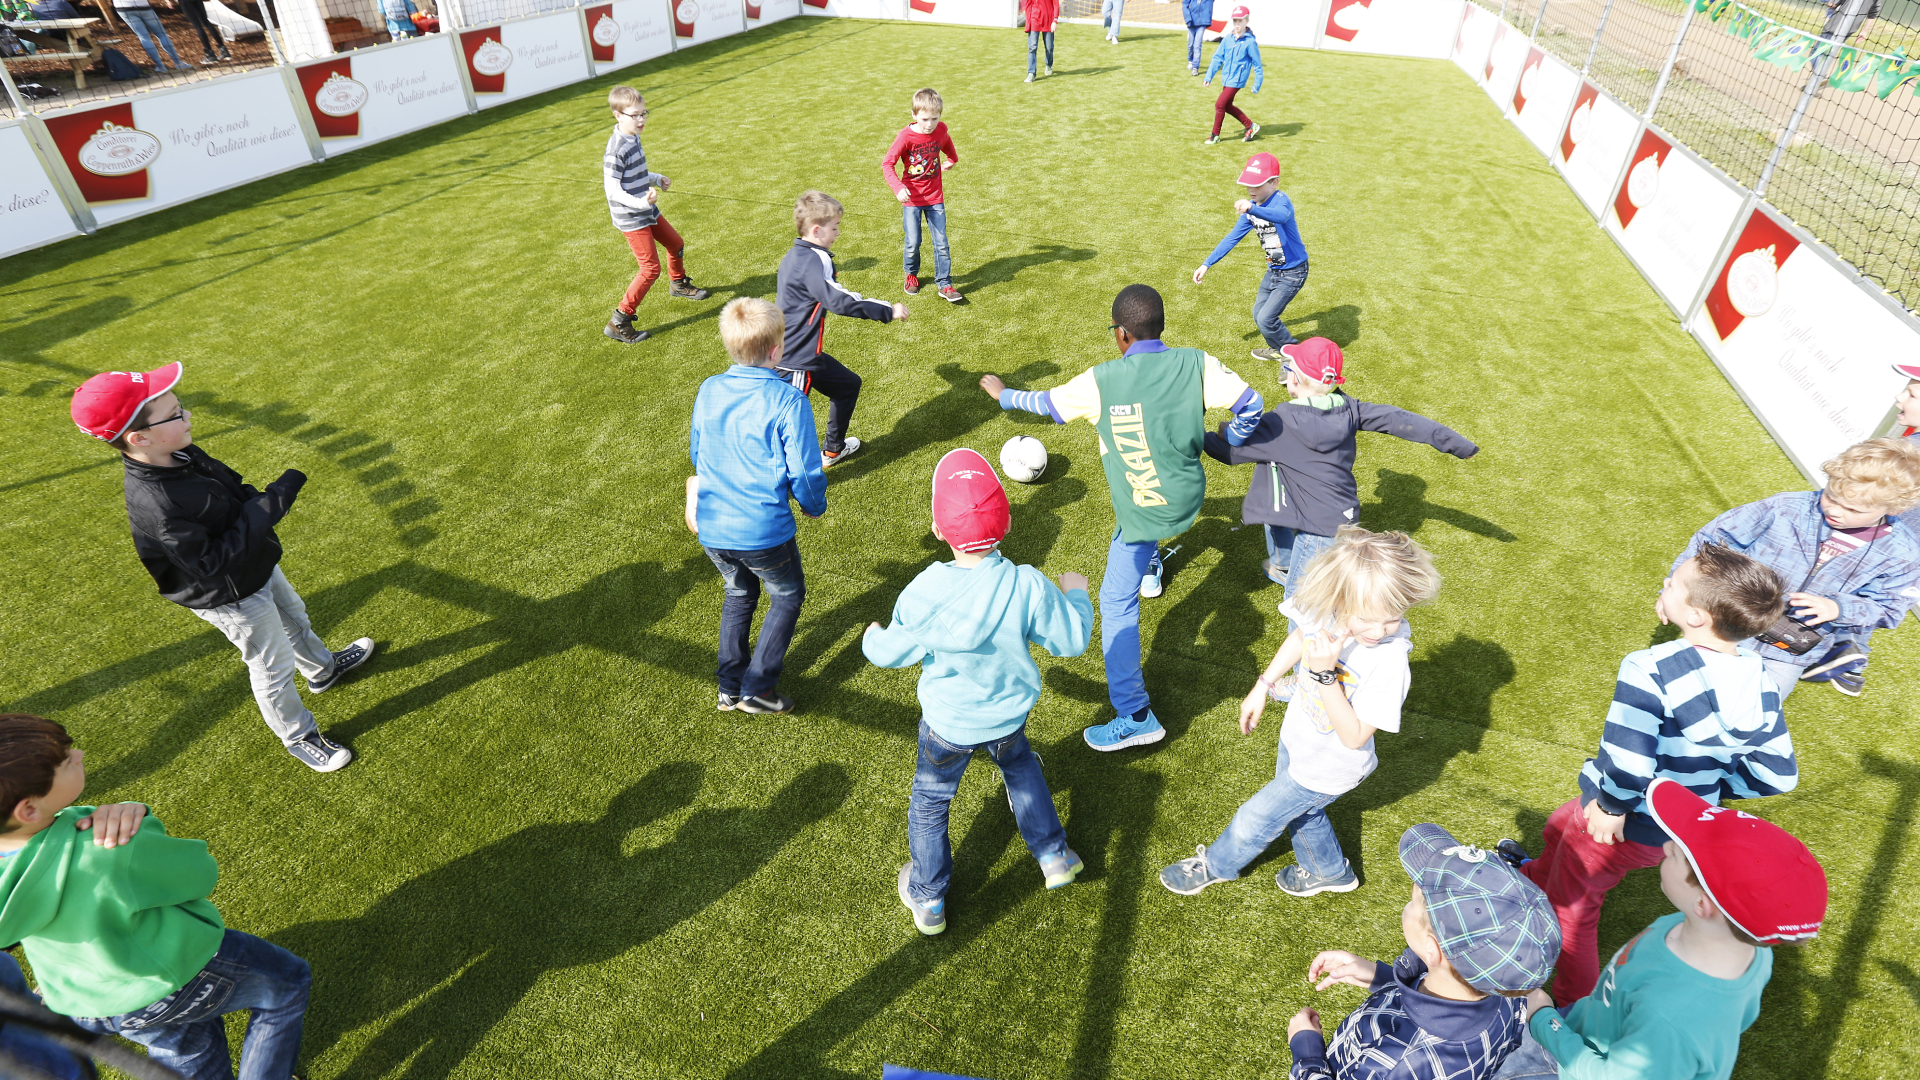 Kids playing soccer in a play area